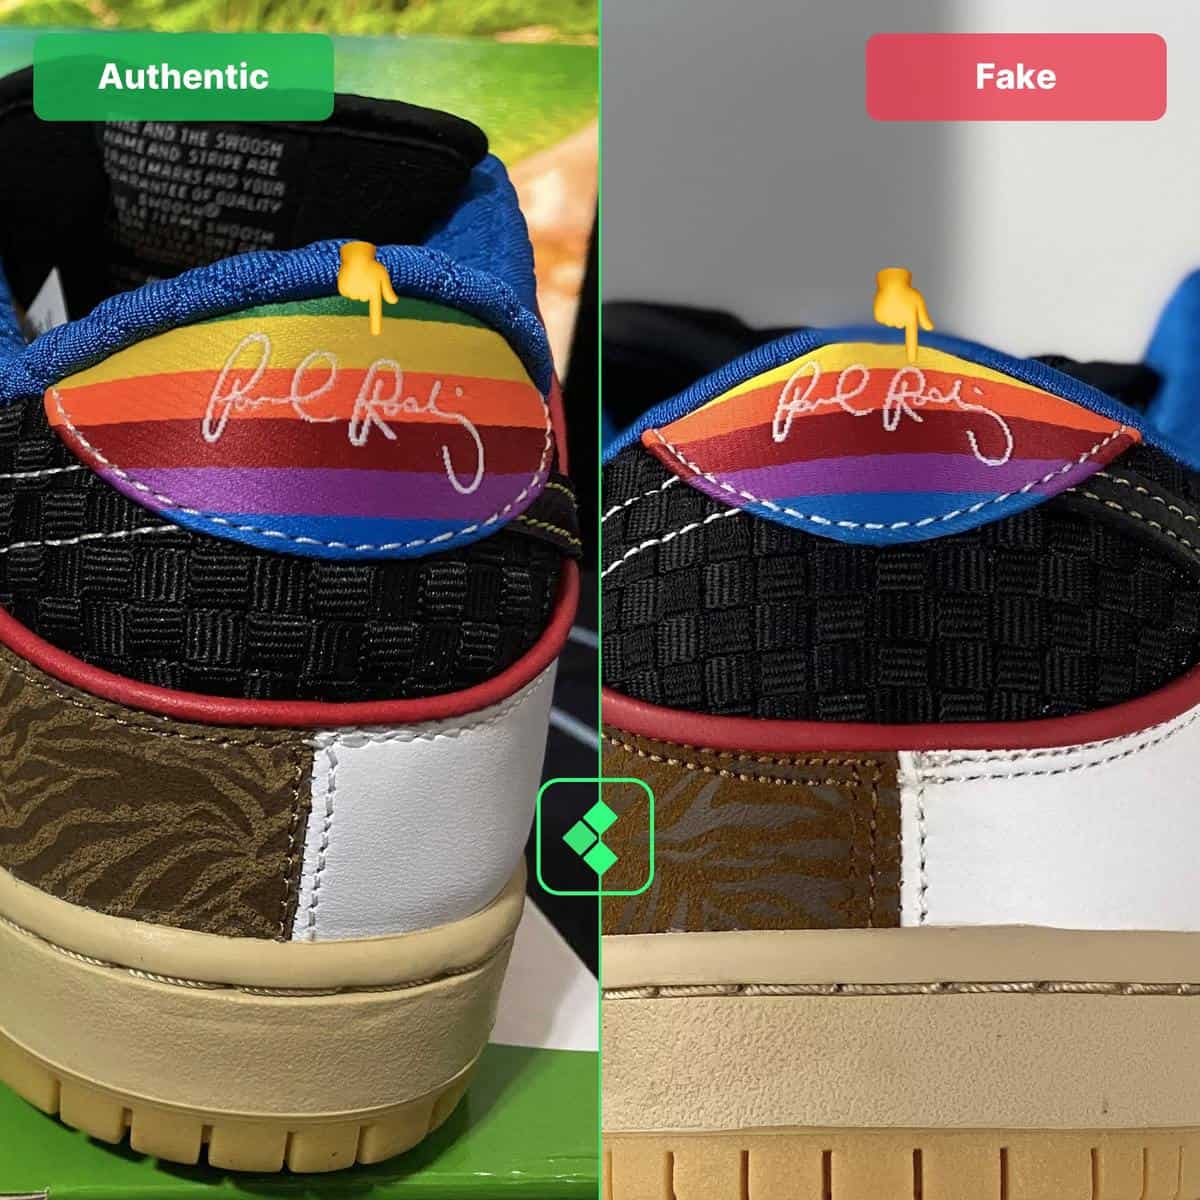 Nike SB Dunk Low What The Paul Fake Vs Real - Legit Check By Ch